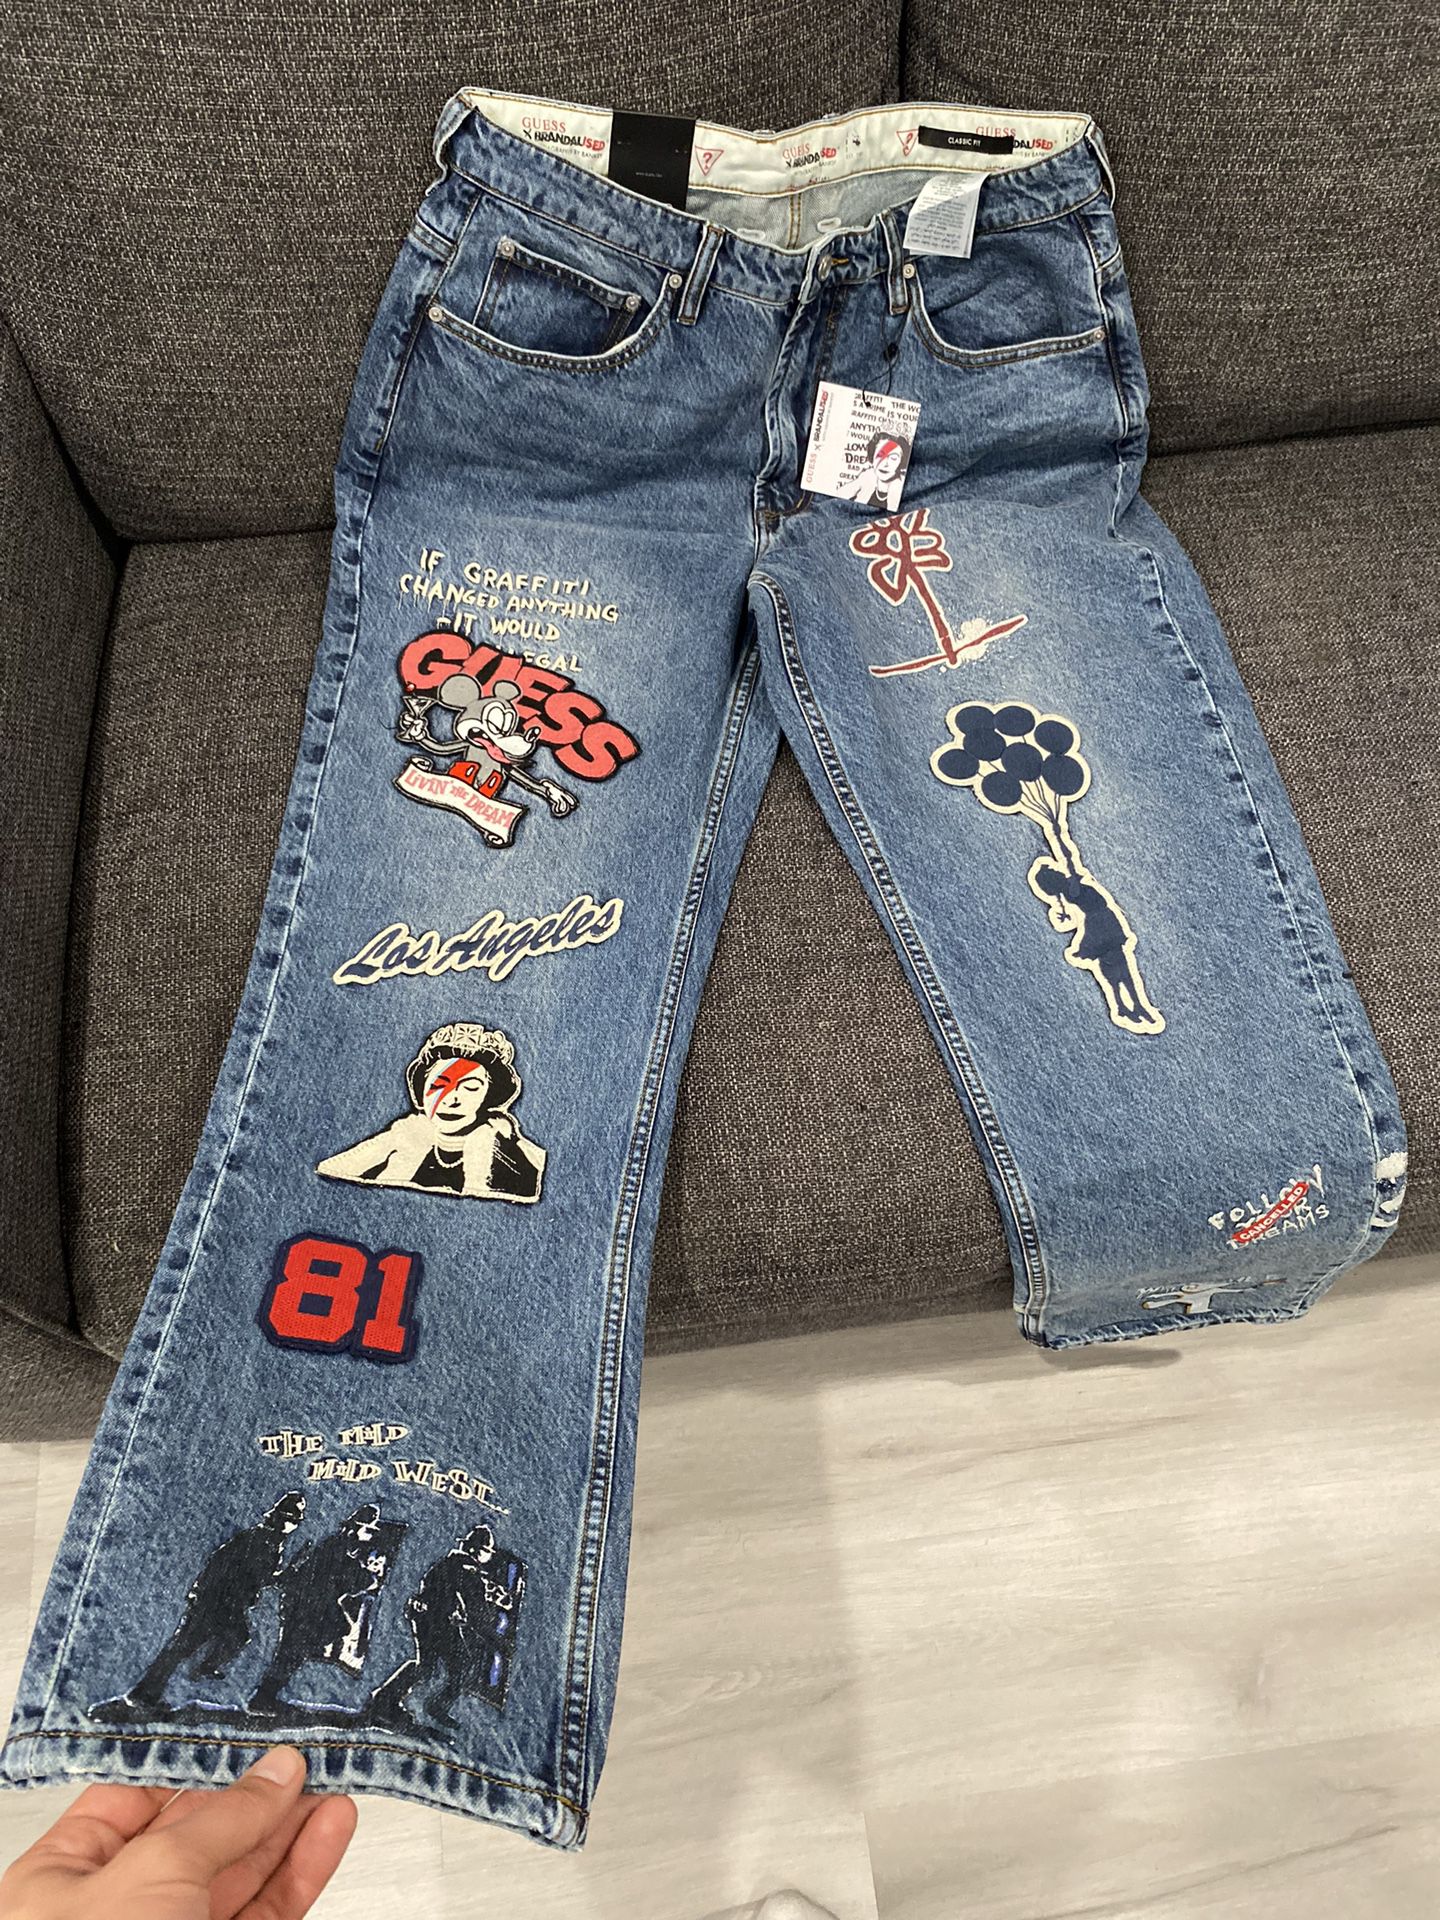  Jean Jacket And Pants 